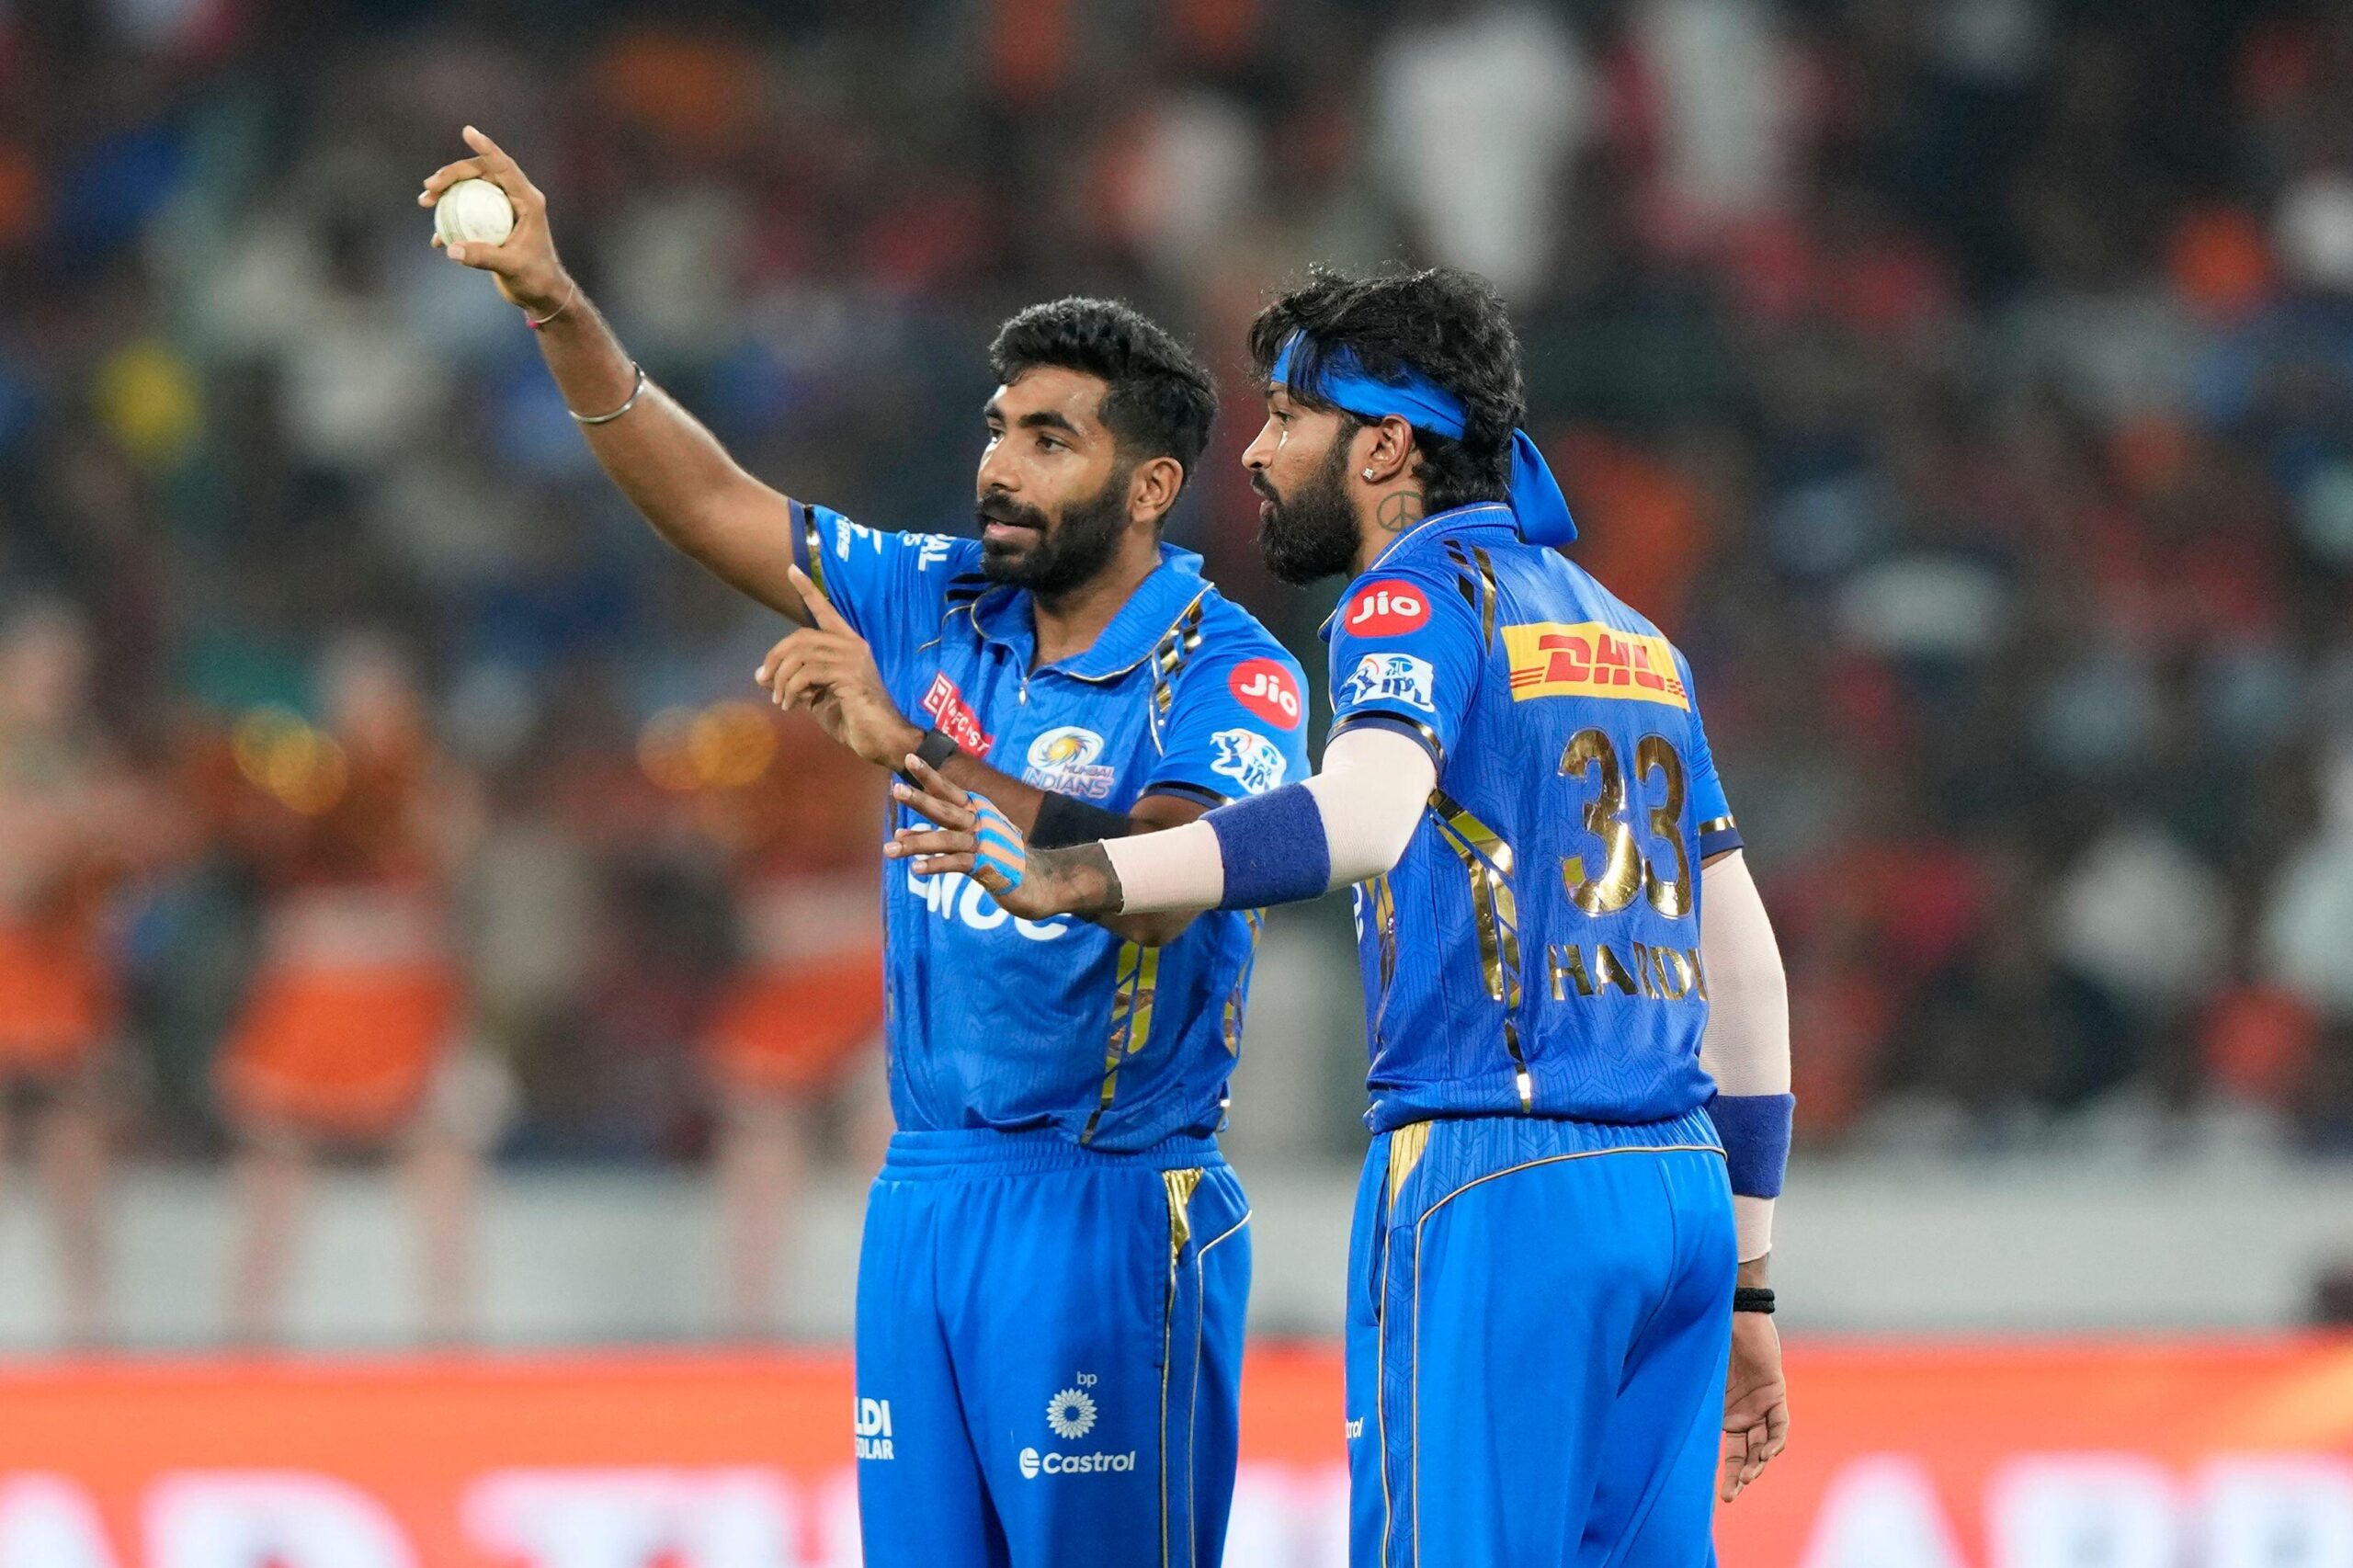 Mumbai Indians are 'only thinking about IPL, not T20 WC'; Franchise sends stern message regarding resting Jasprit Bumrah